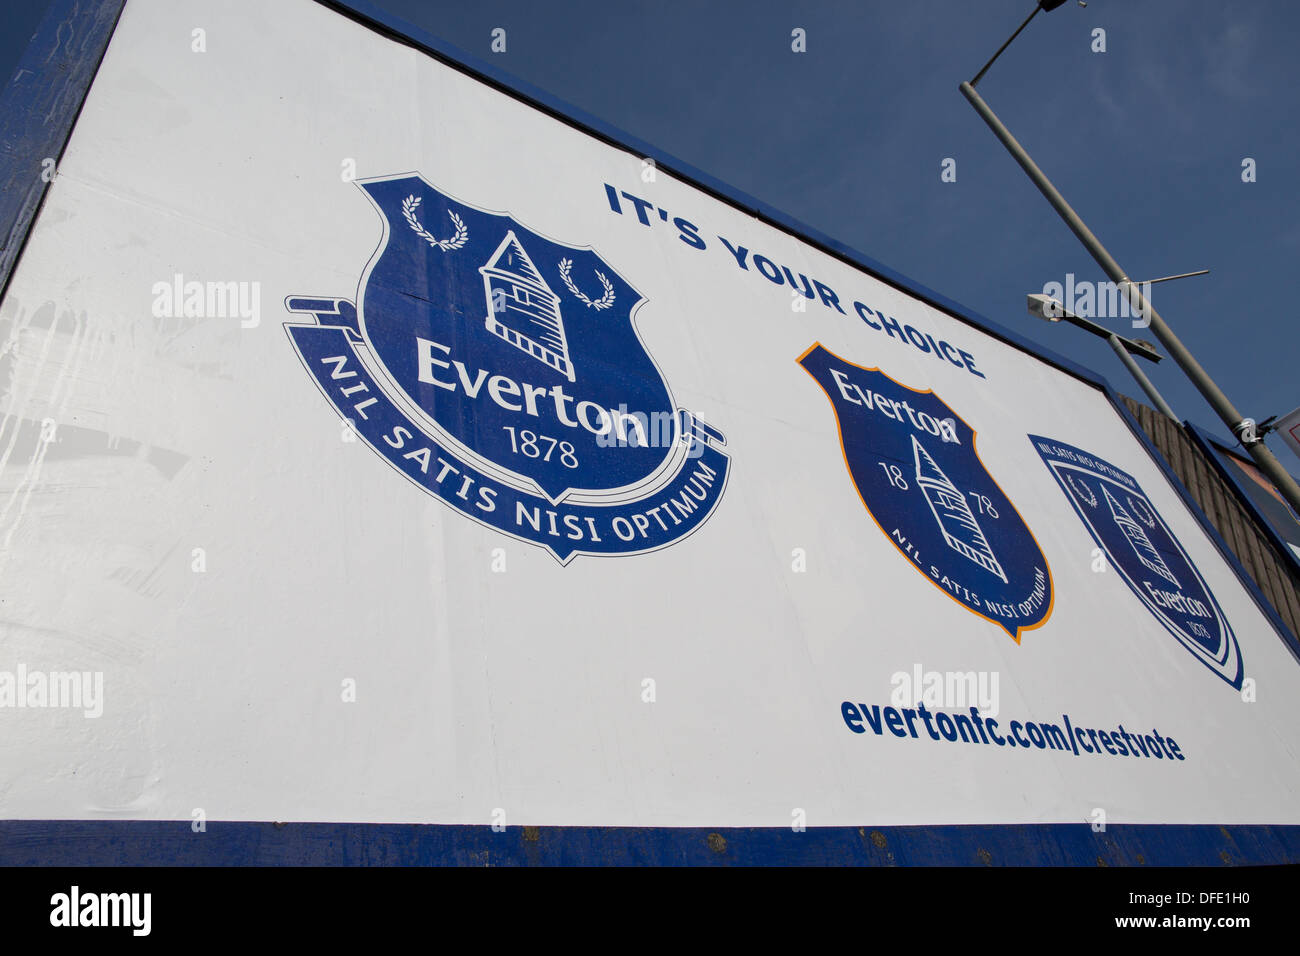 A hoarding outside Goodison Park in Liverpool showing the three crest options for Everton FC. The new crest is on the left. Stock Photo